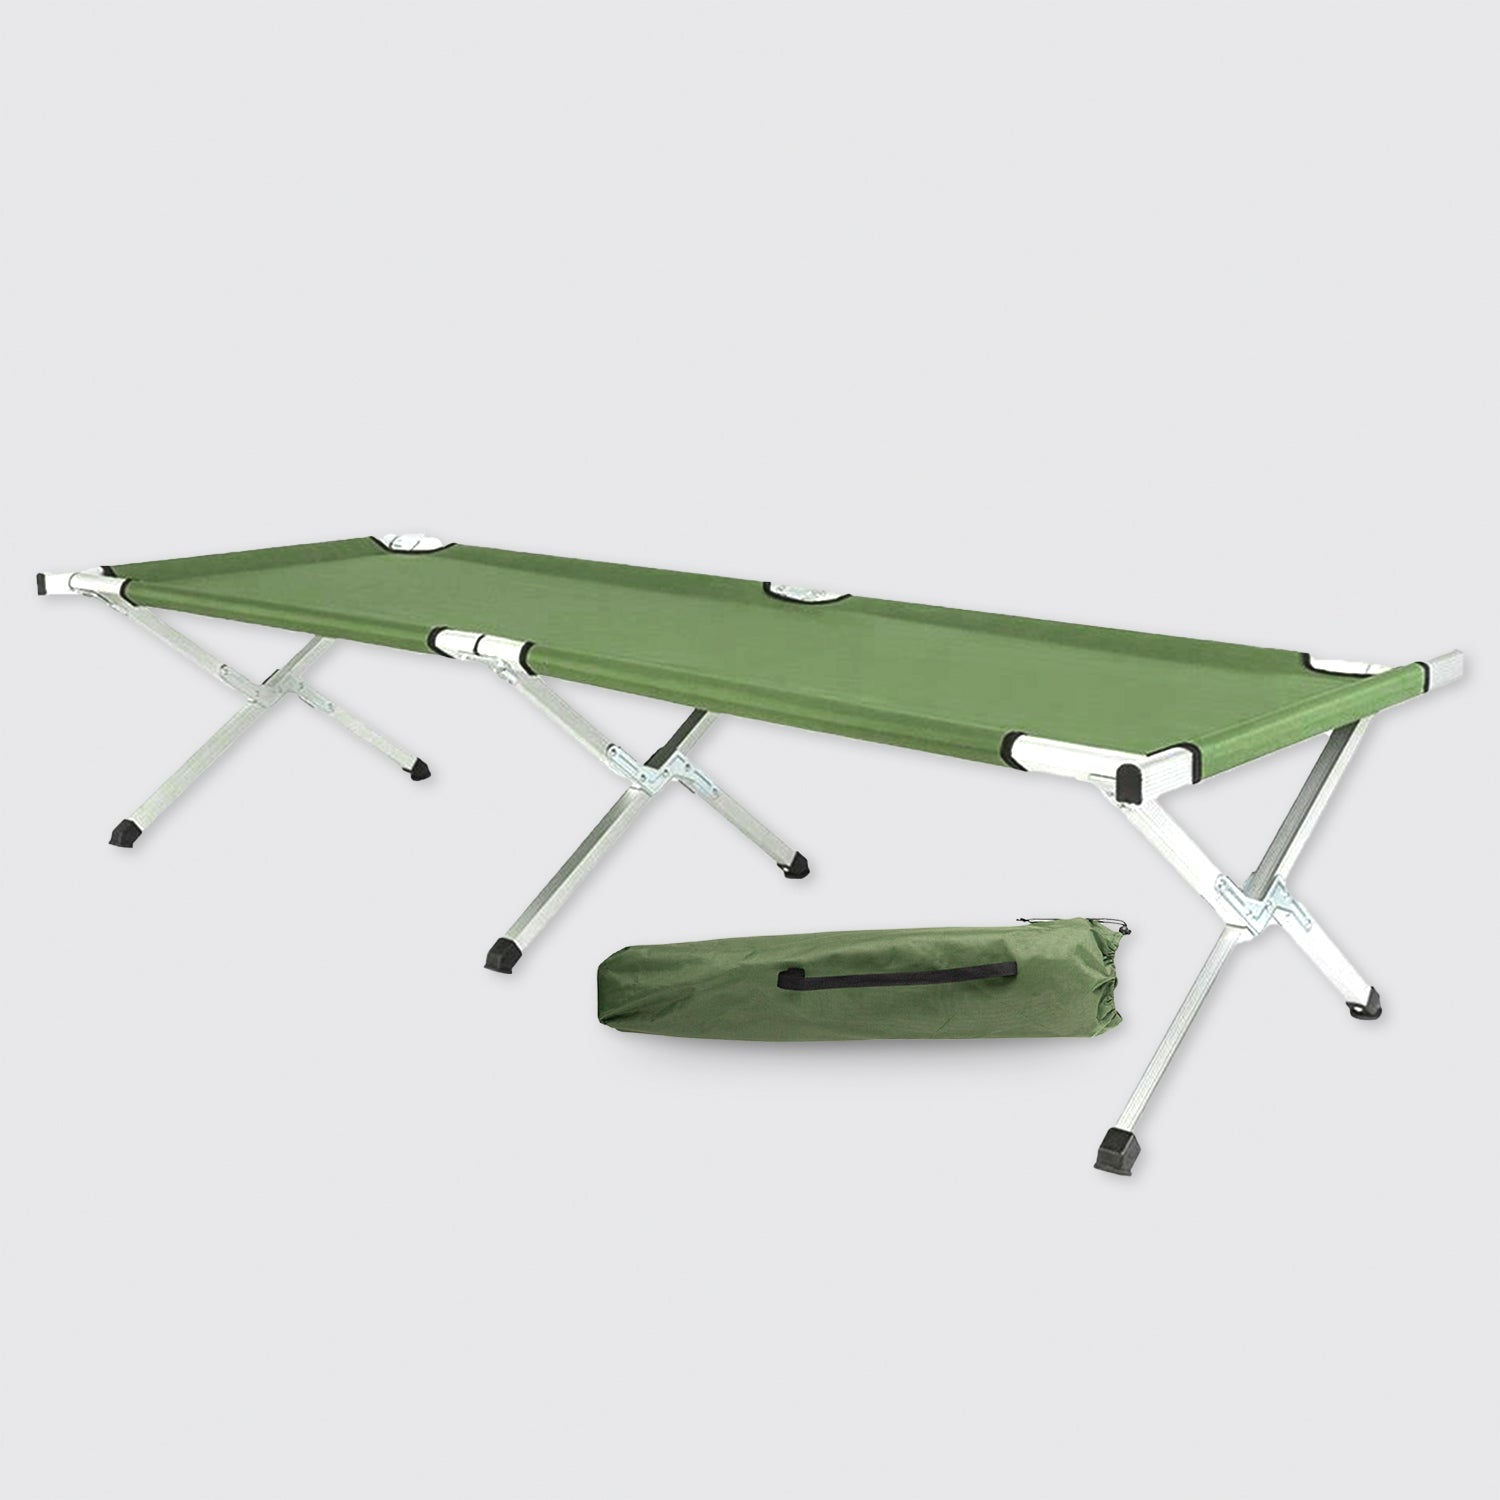 MediTac Camping Military Outdoors Bed Cot - Heavy Duty, Durable with Carry Storage Bag